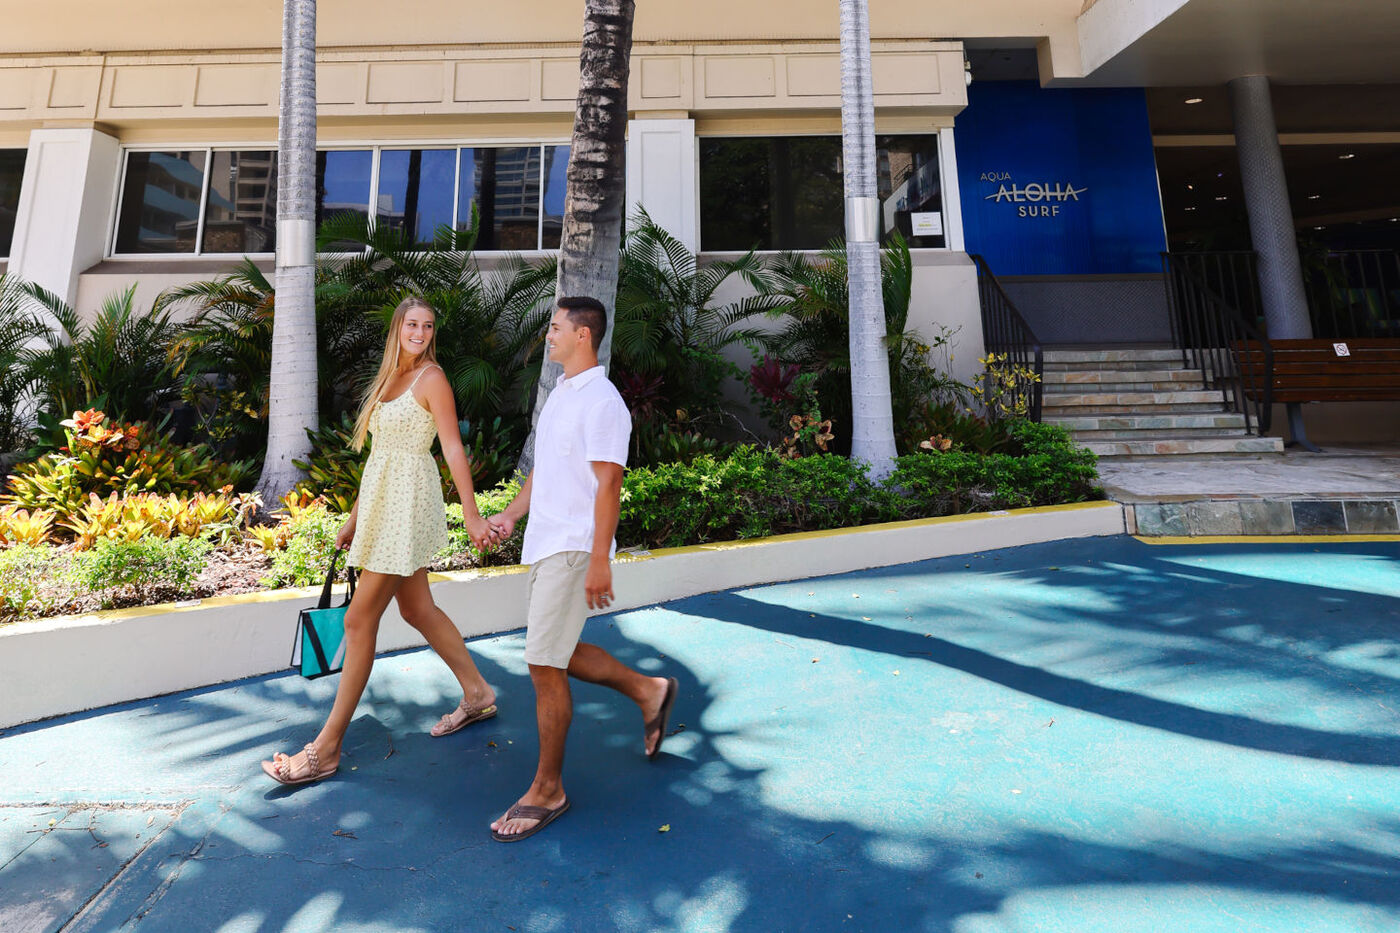 Couple taking a selfie in the lobby at the Aqua Aloha Surf Hotel